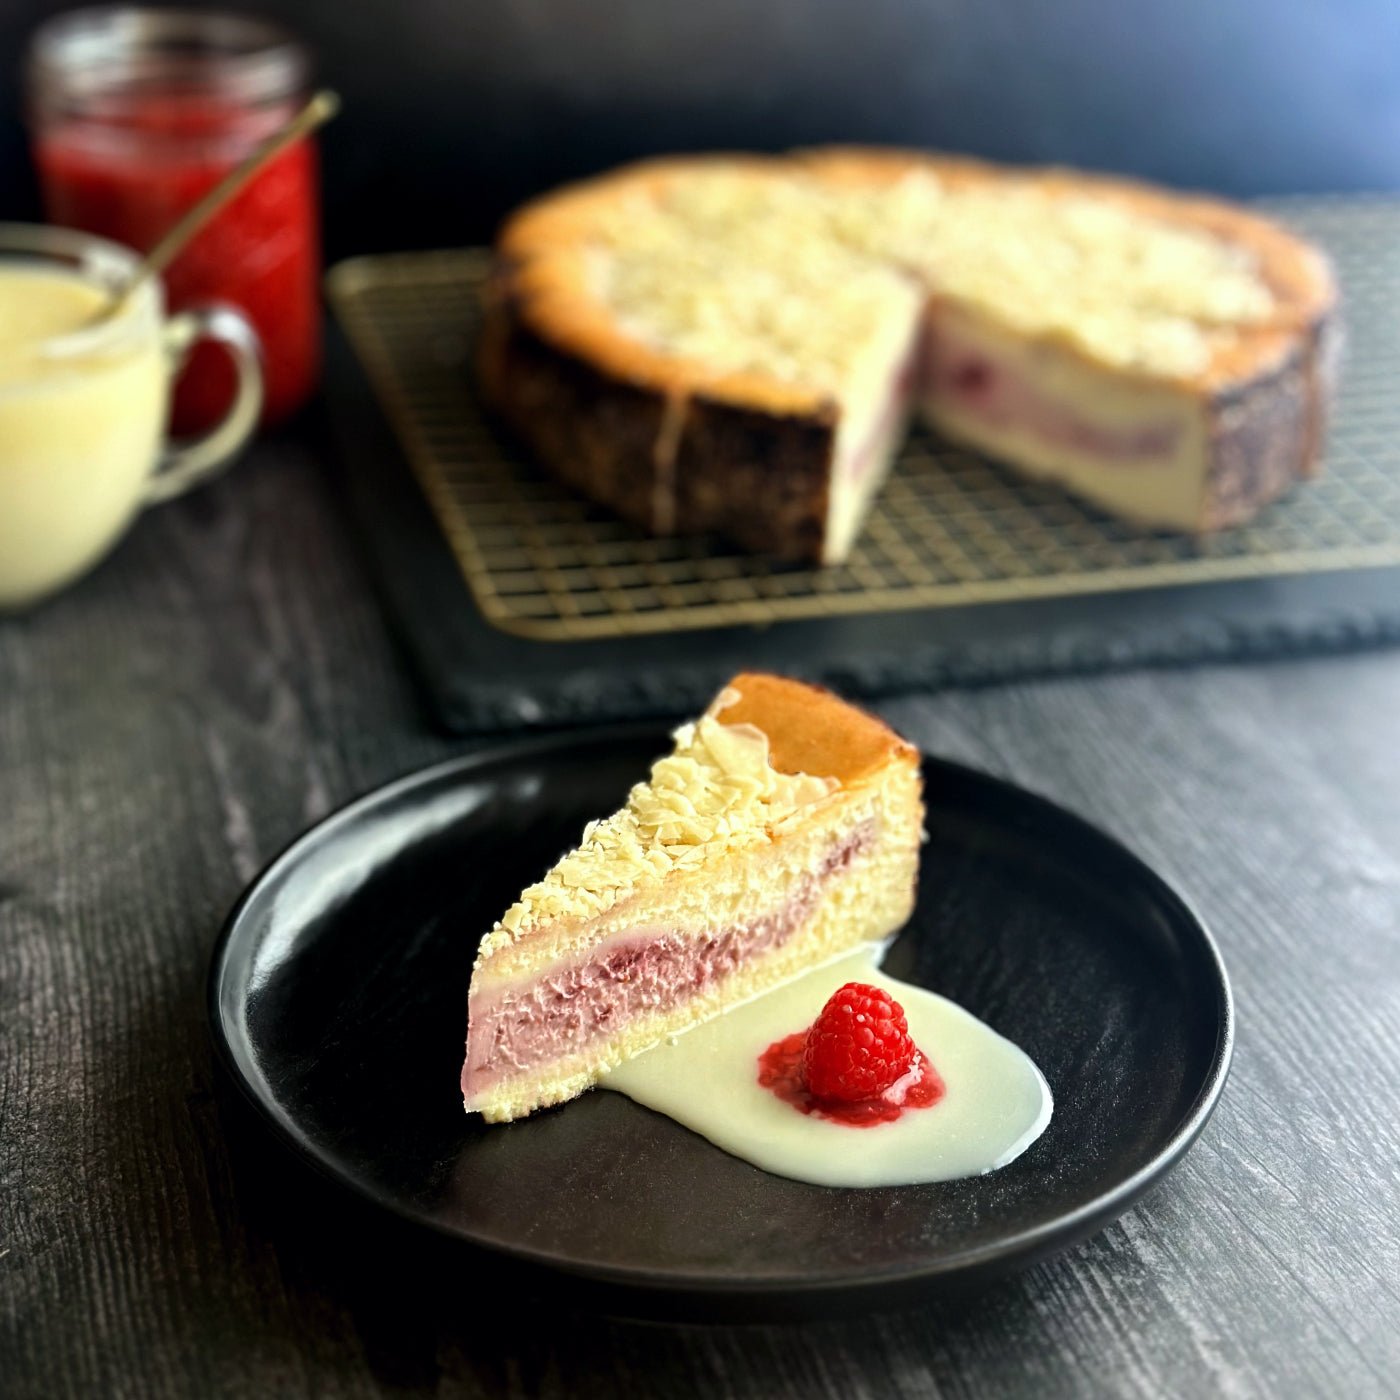 Velvety slice of white chocolate raspberry cheesecake with an elegant layer of handcrafted raspberry filling and topped with elegant white chocolate shavings, with a serving of white chocolate and raspberry sauces on the side, and a fresh raspberry garnish